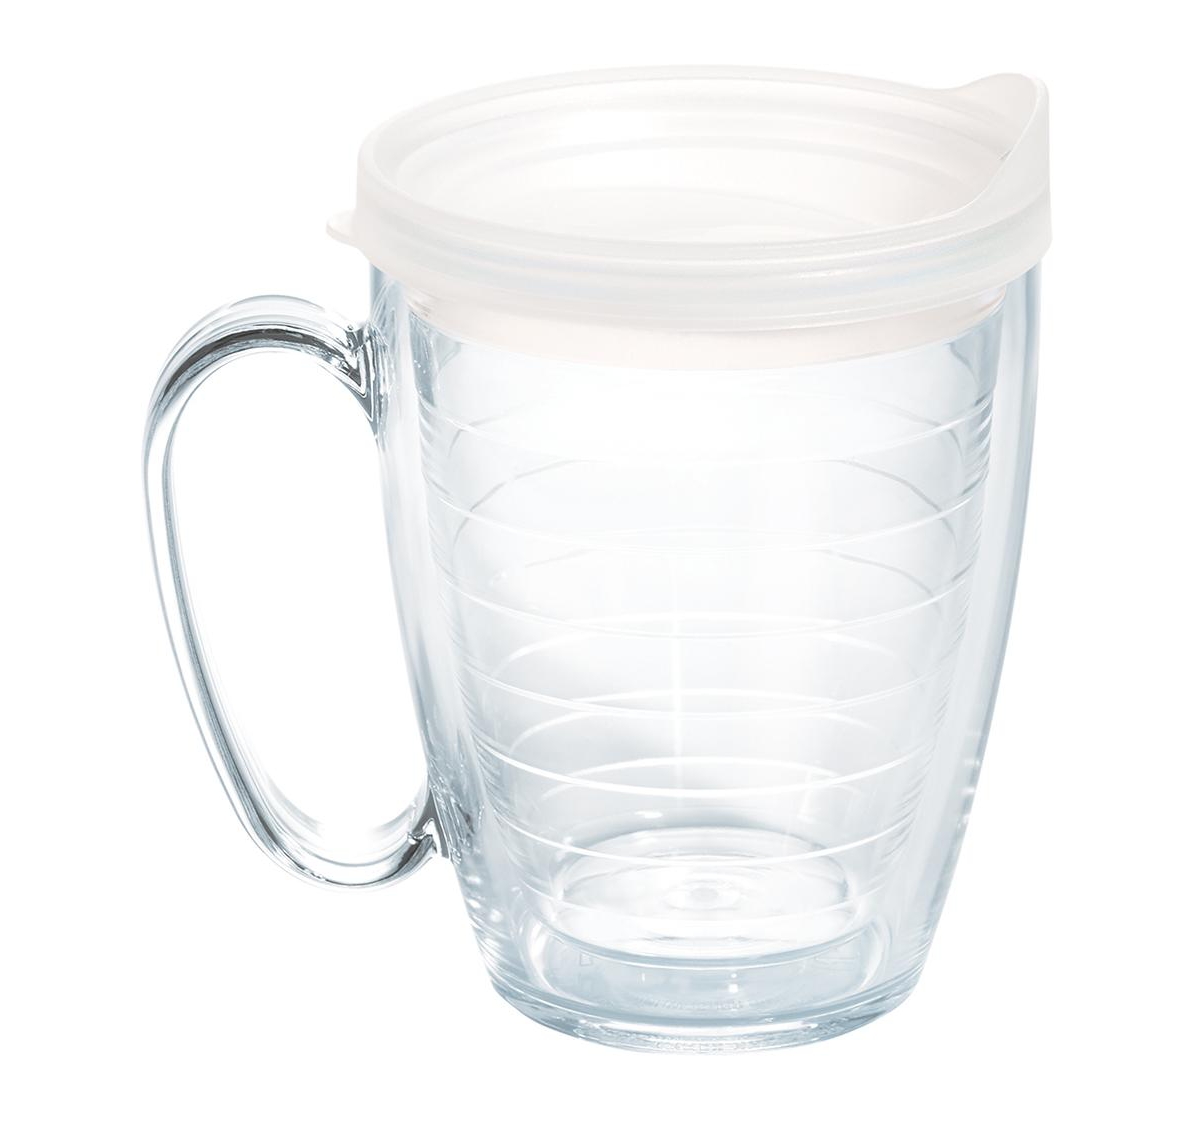 Tervis Tumbler Tervis Clear Lidded Made In Usa Double Walled Insulated Tumbler Travel Cup Keeps Drinks Cold & Hot, In No Color